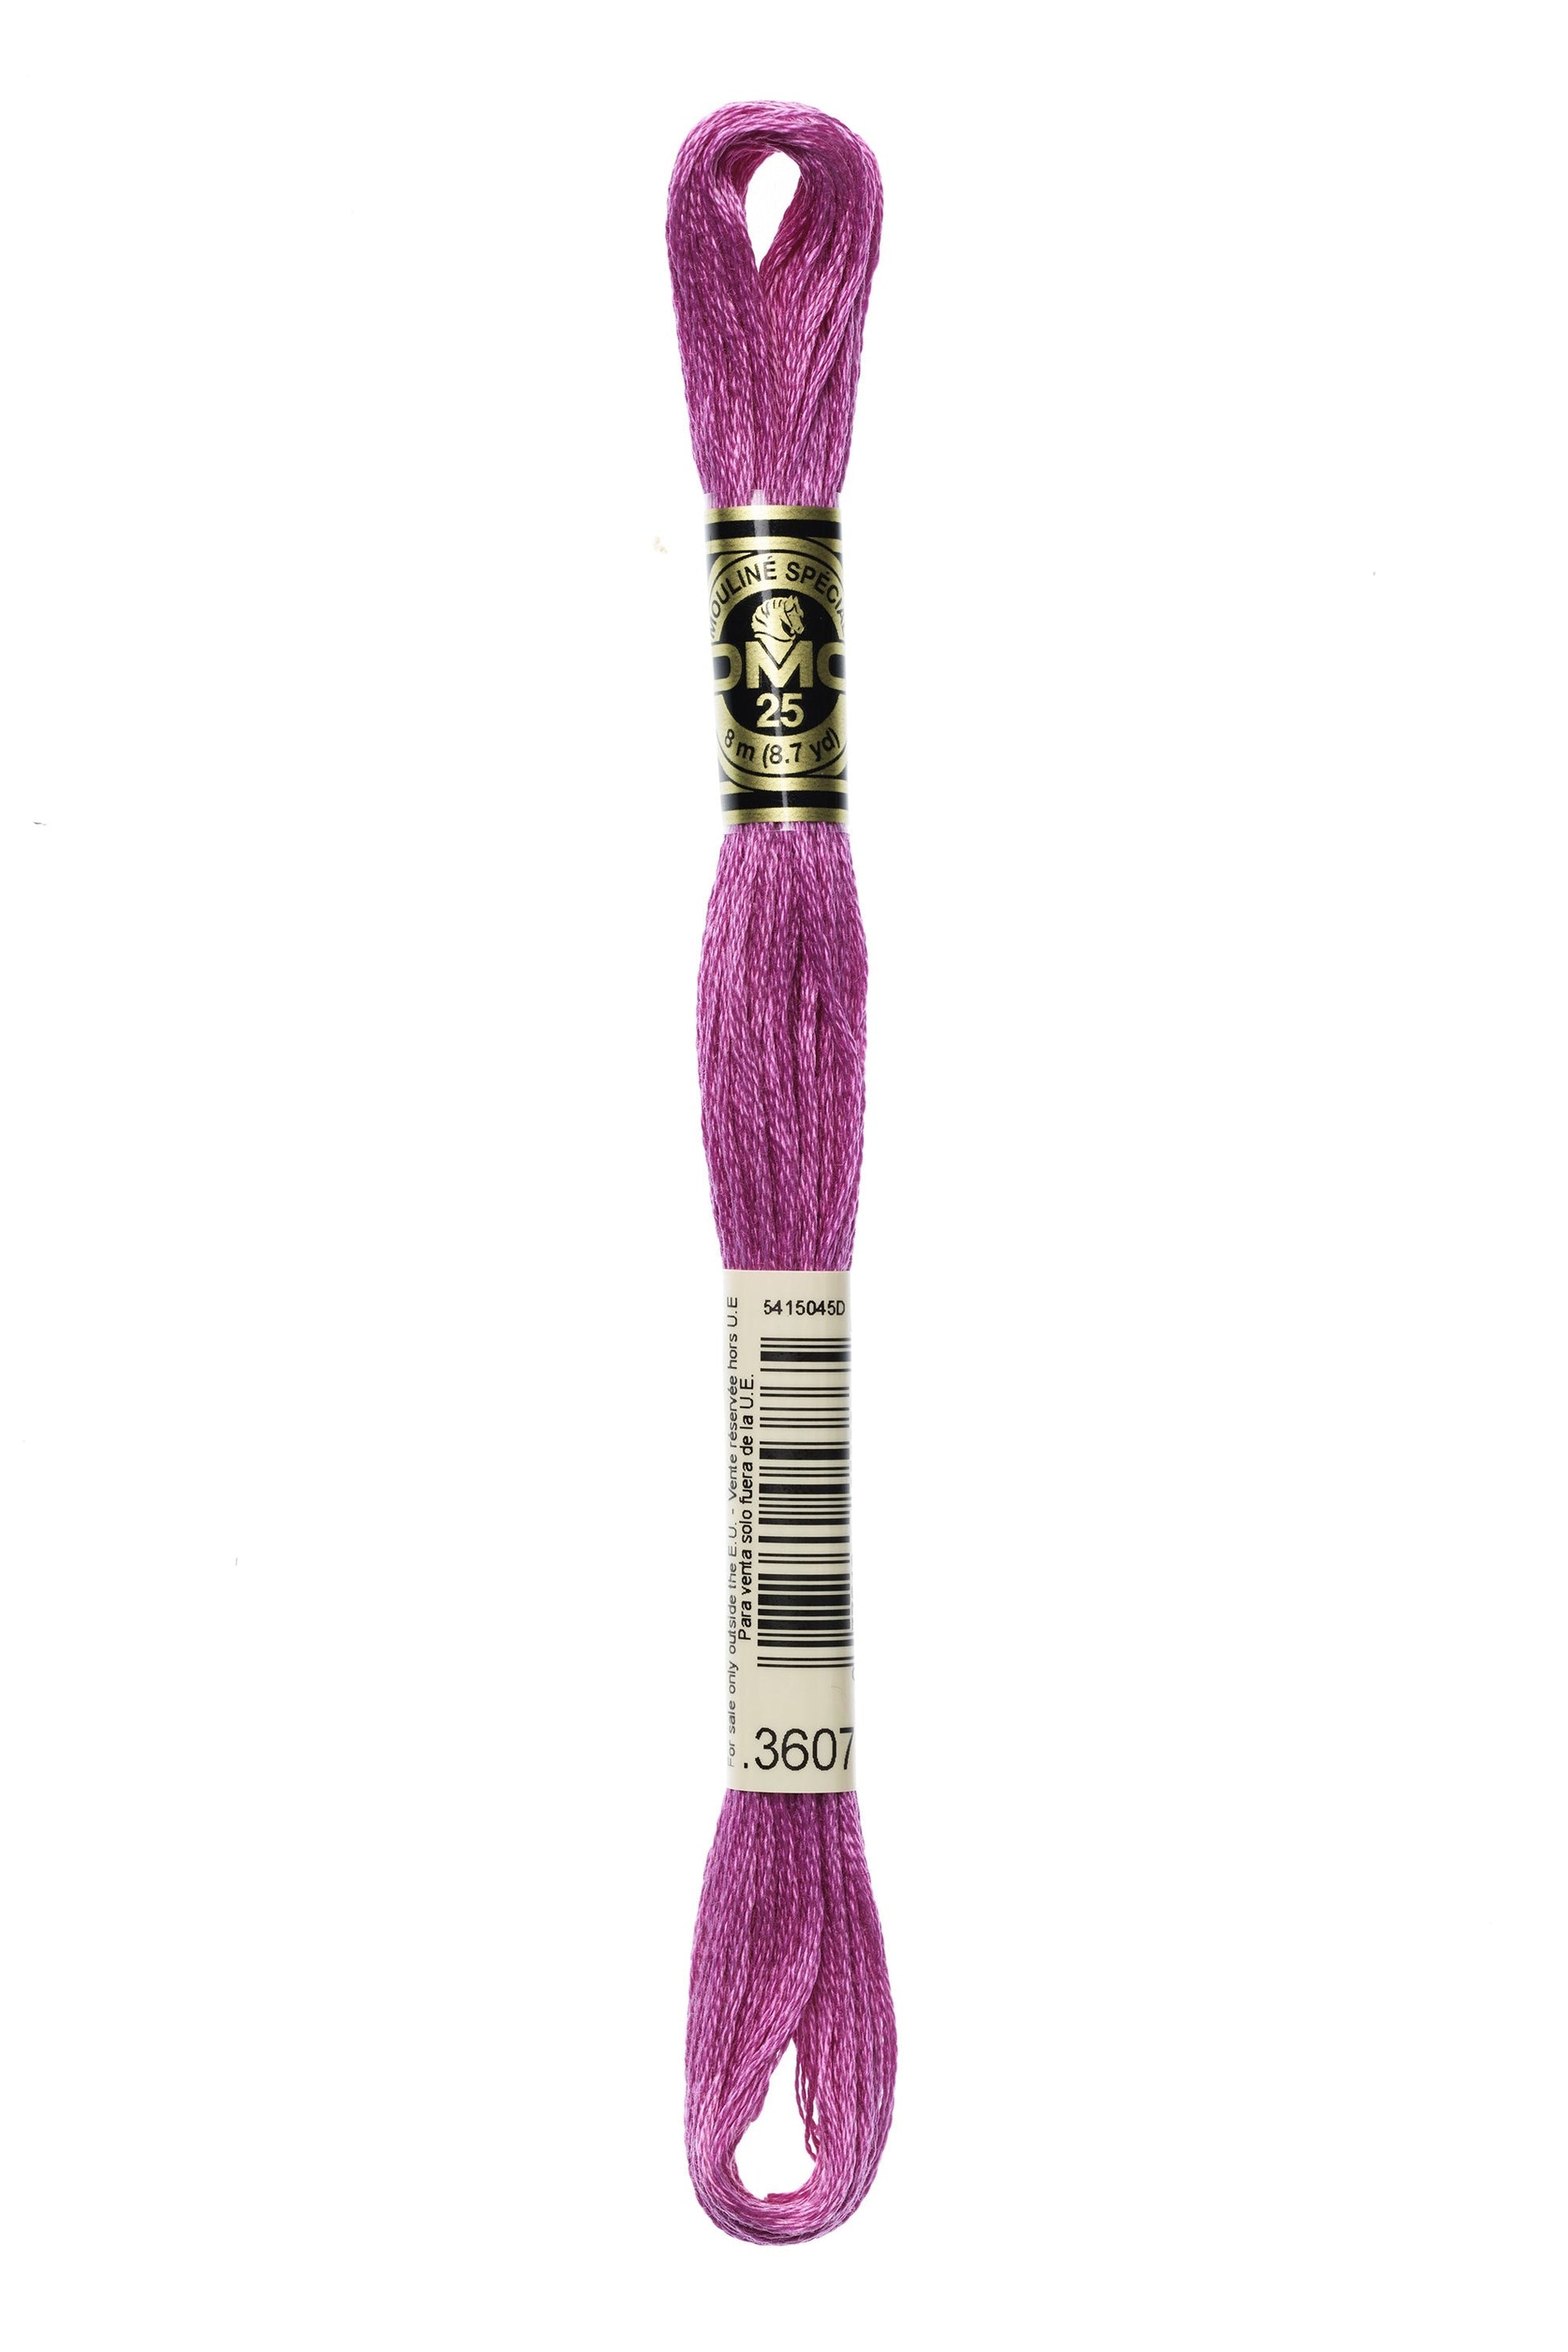 Six-Strand Embroidery Floss - 3607 (Hibiscus)-Embroidery Thread-Wild and Woolly Yarns